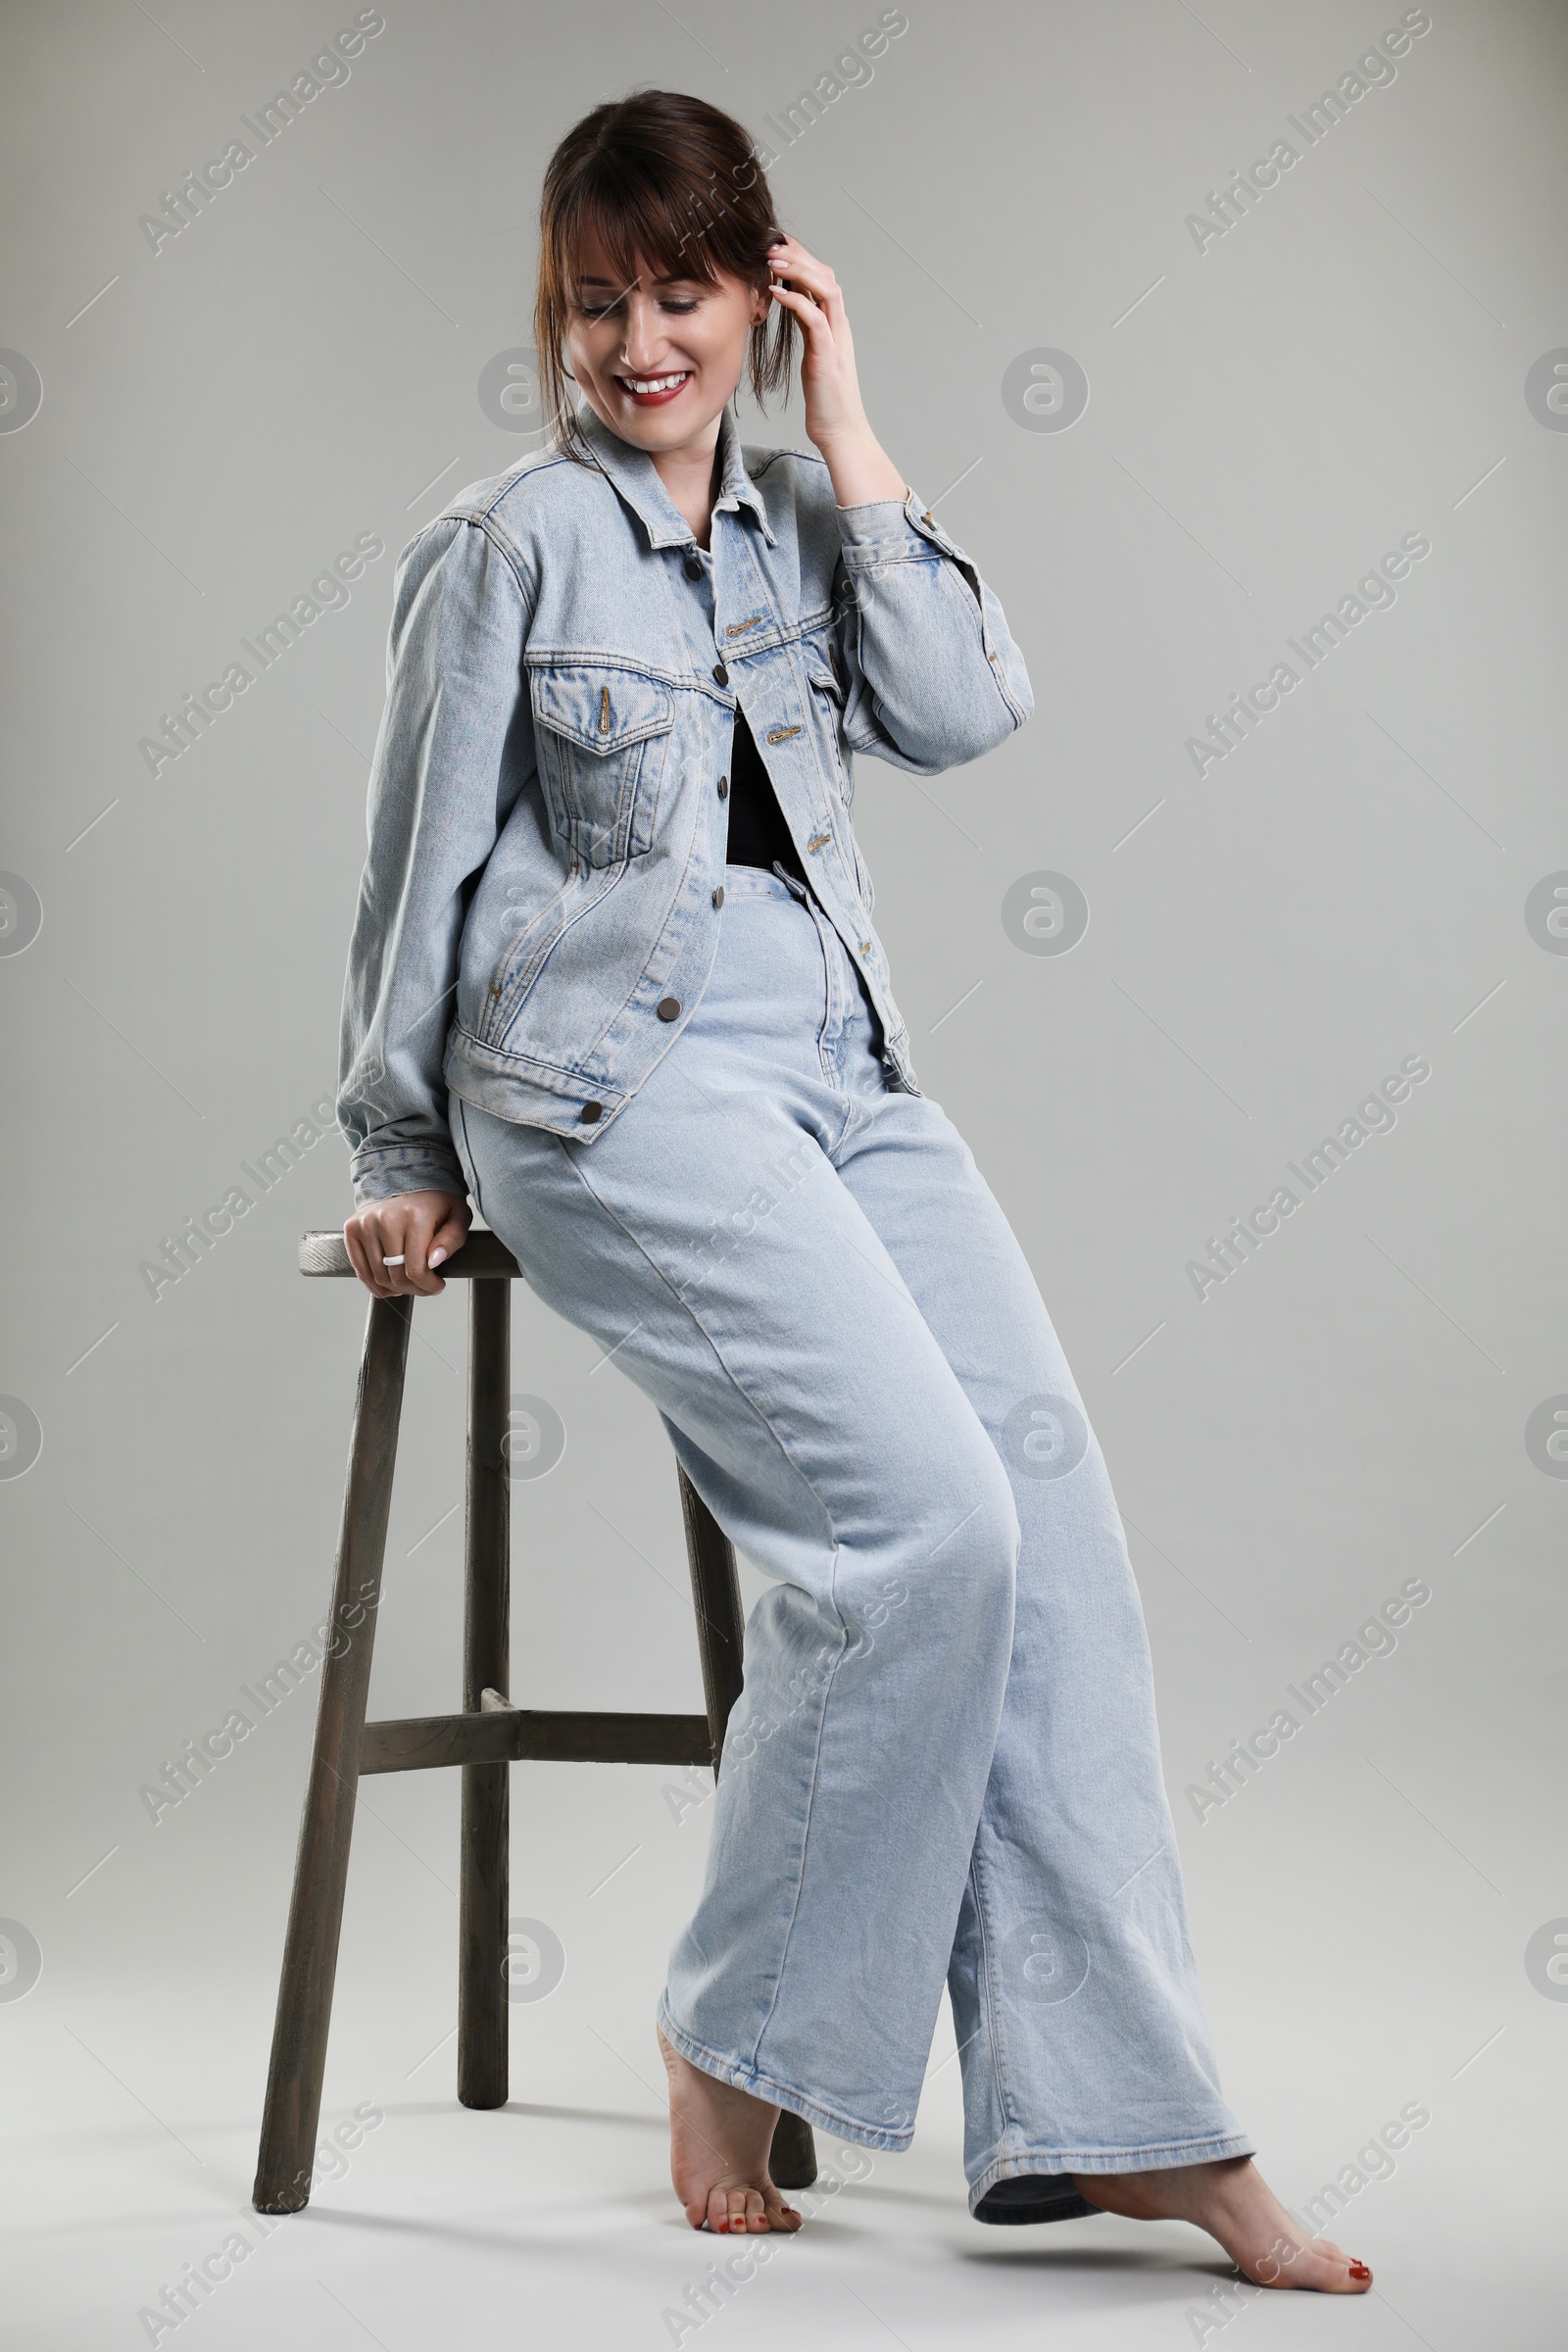 Photo of Beautiful woman sitting on stool against grey background